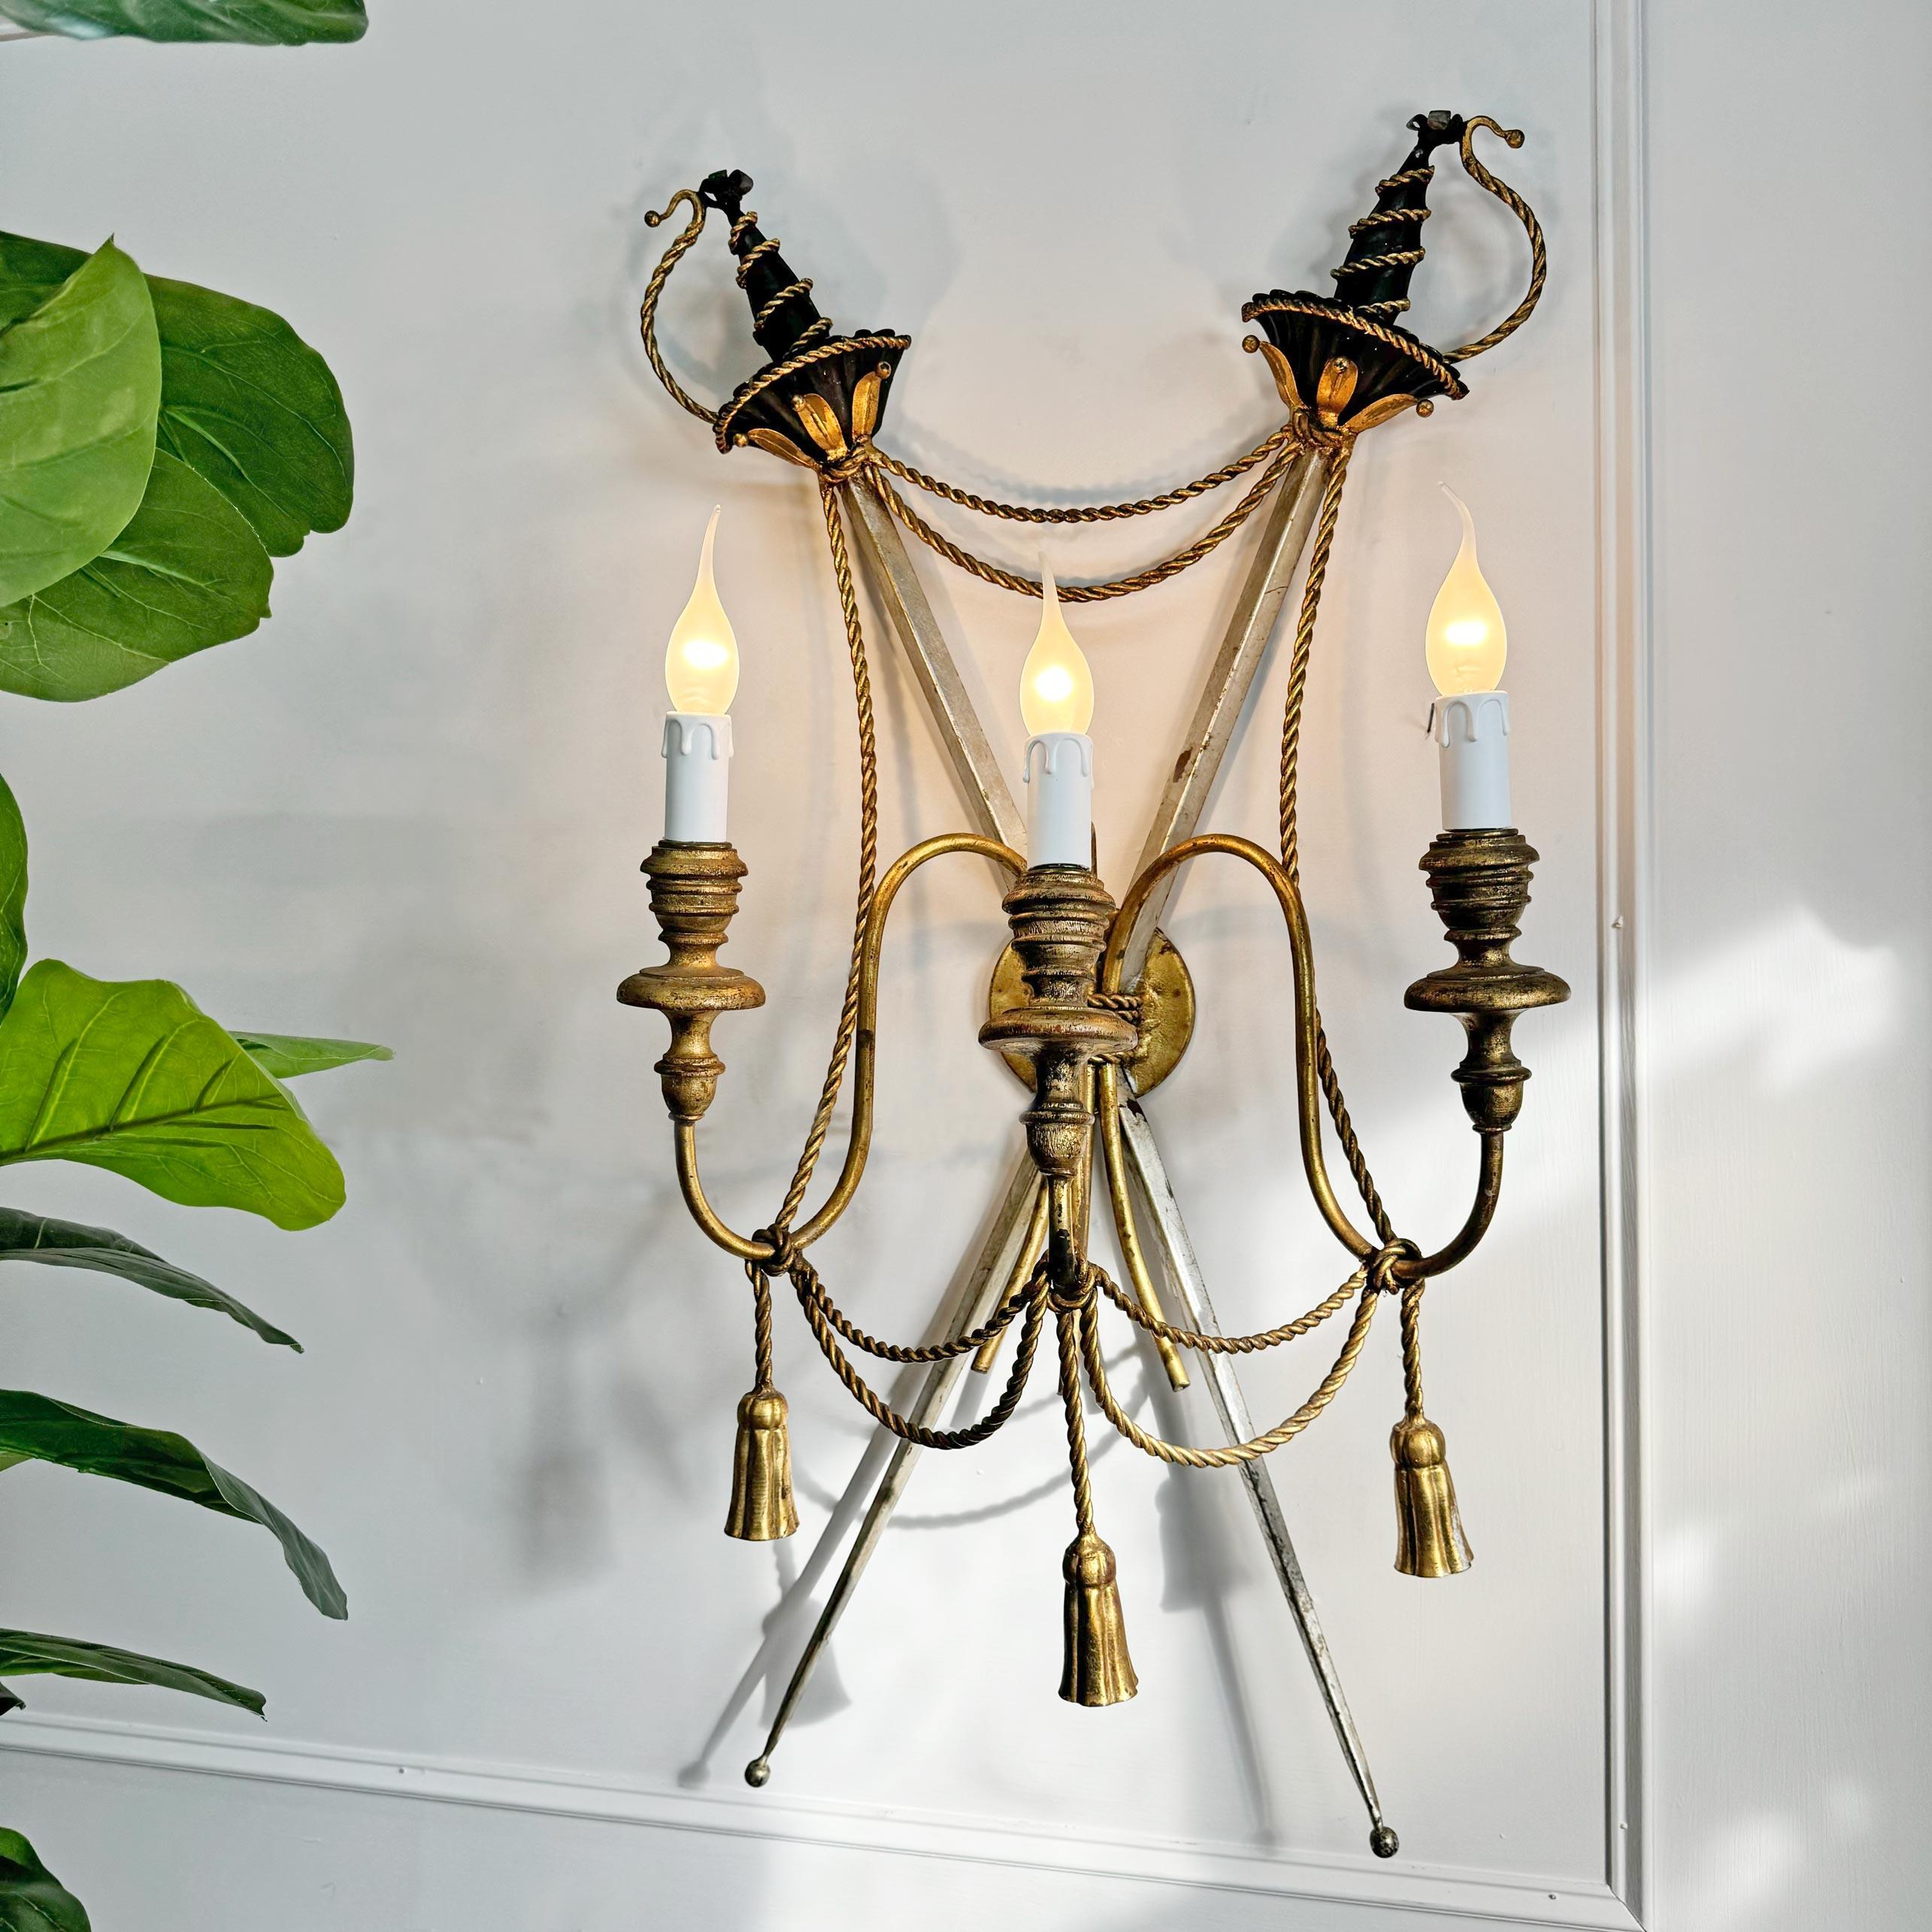 An extremely rare and incredibly ornate Italian wall light, dating to the 1950's, in the empire style and modeled as a pair of crossed swords, in gilt and silver gilt, decorated with gold rope twist and tassel to the front, the three lamp holders in